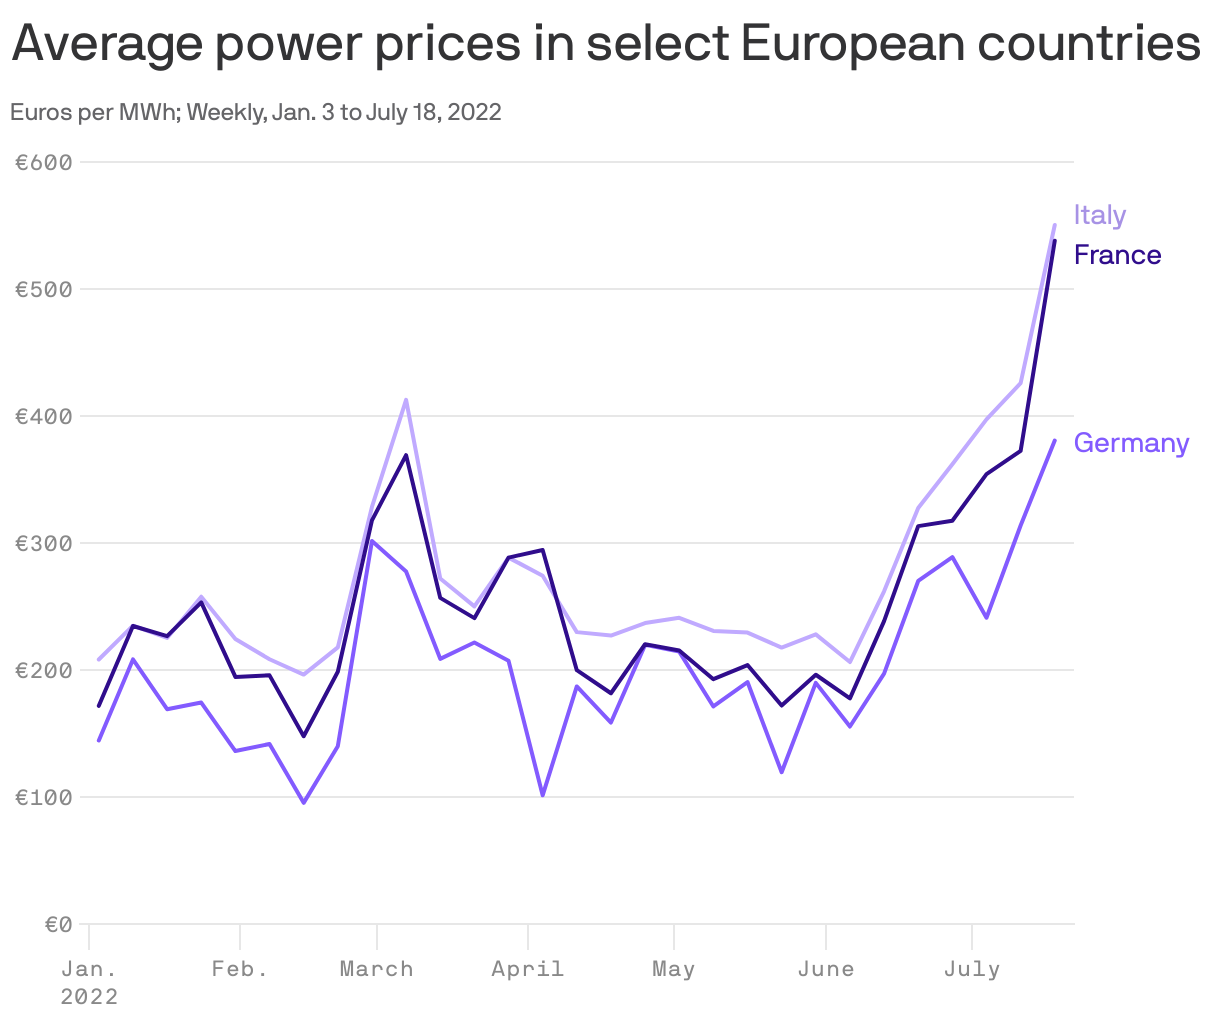 Average power prices in select European countries